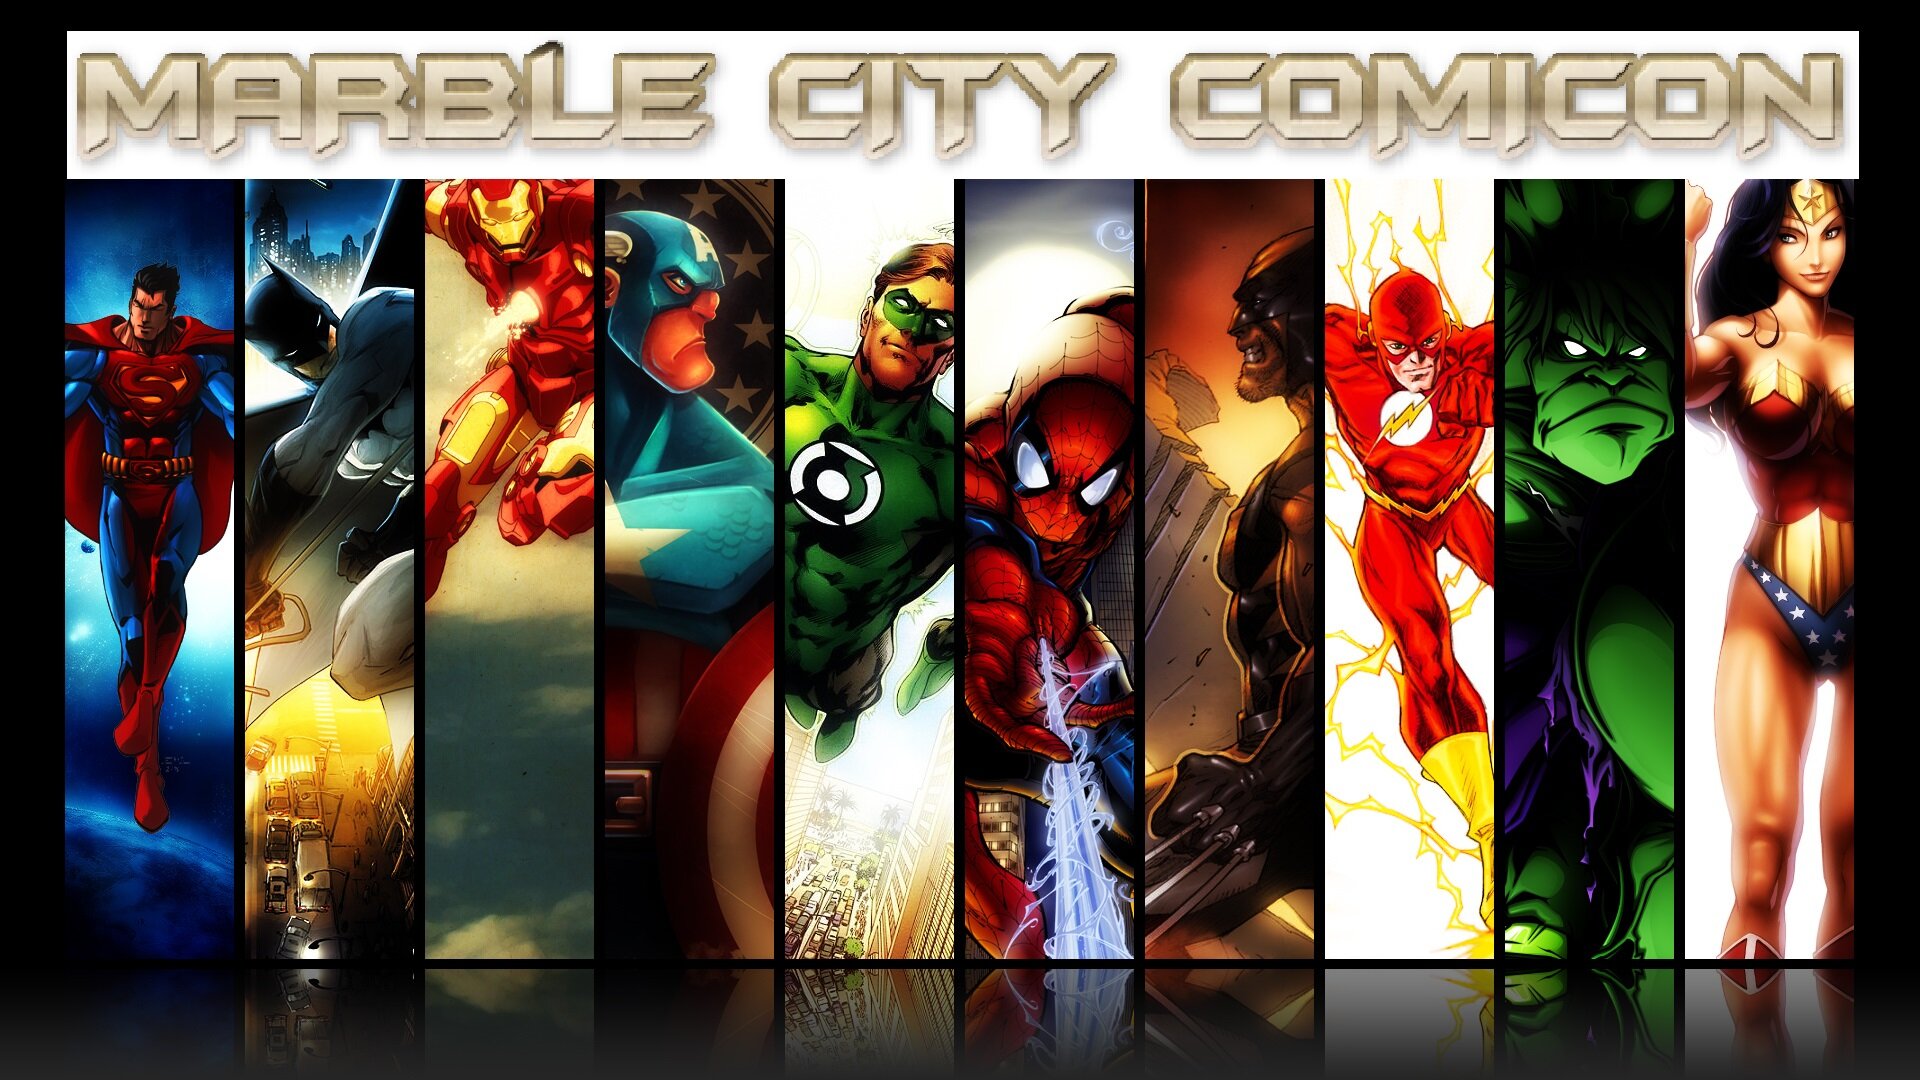 Marble City Comicon is a comic con located in Knoxville,Tennessee.  April 8-9 2017